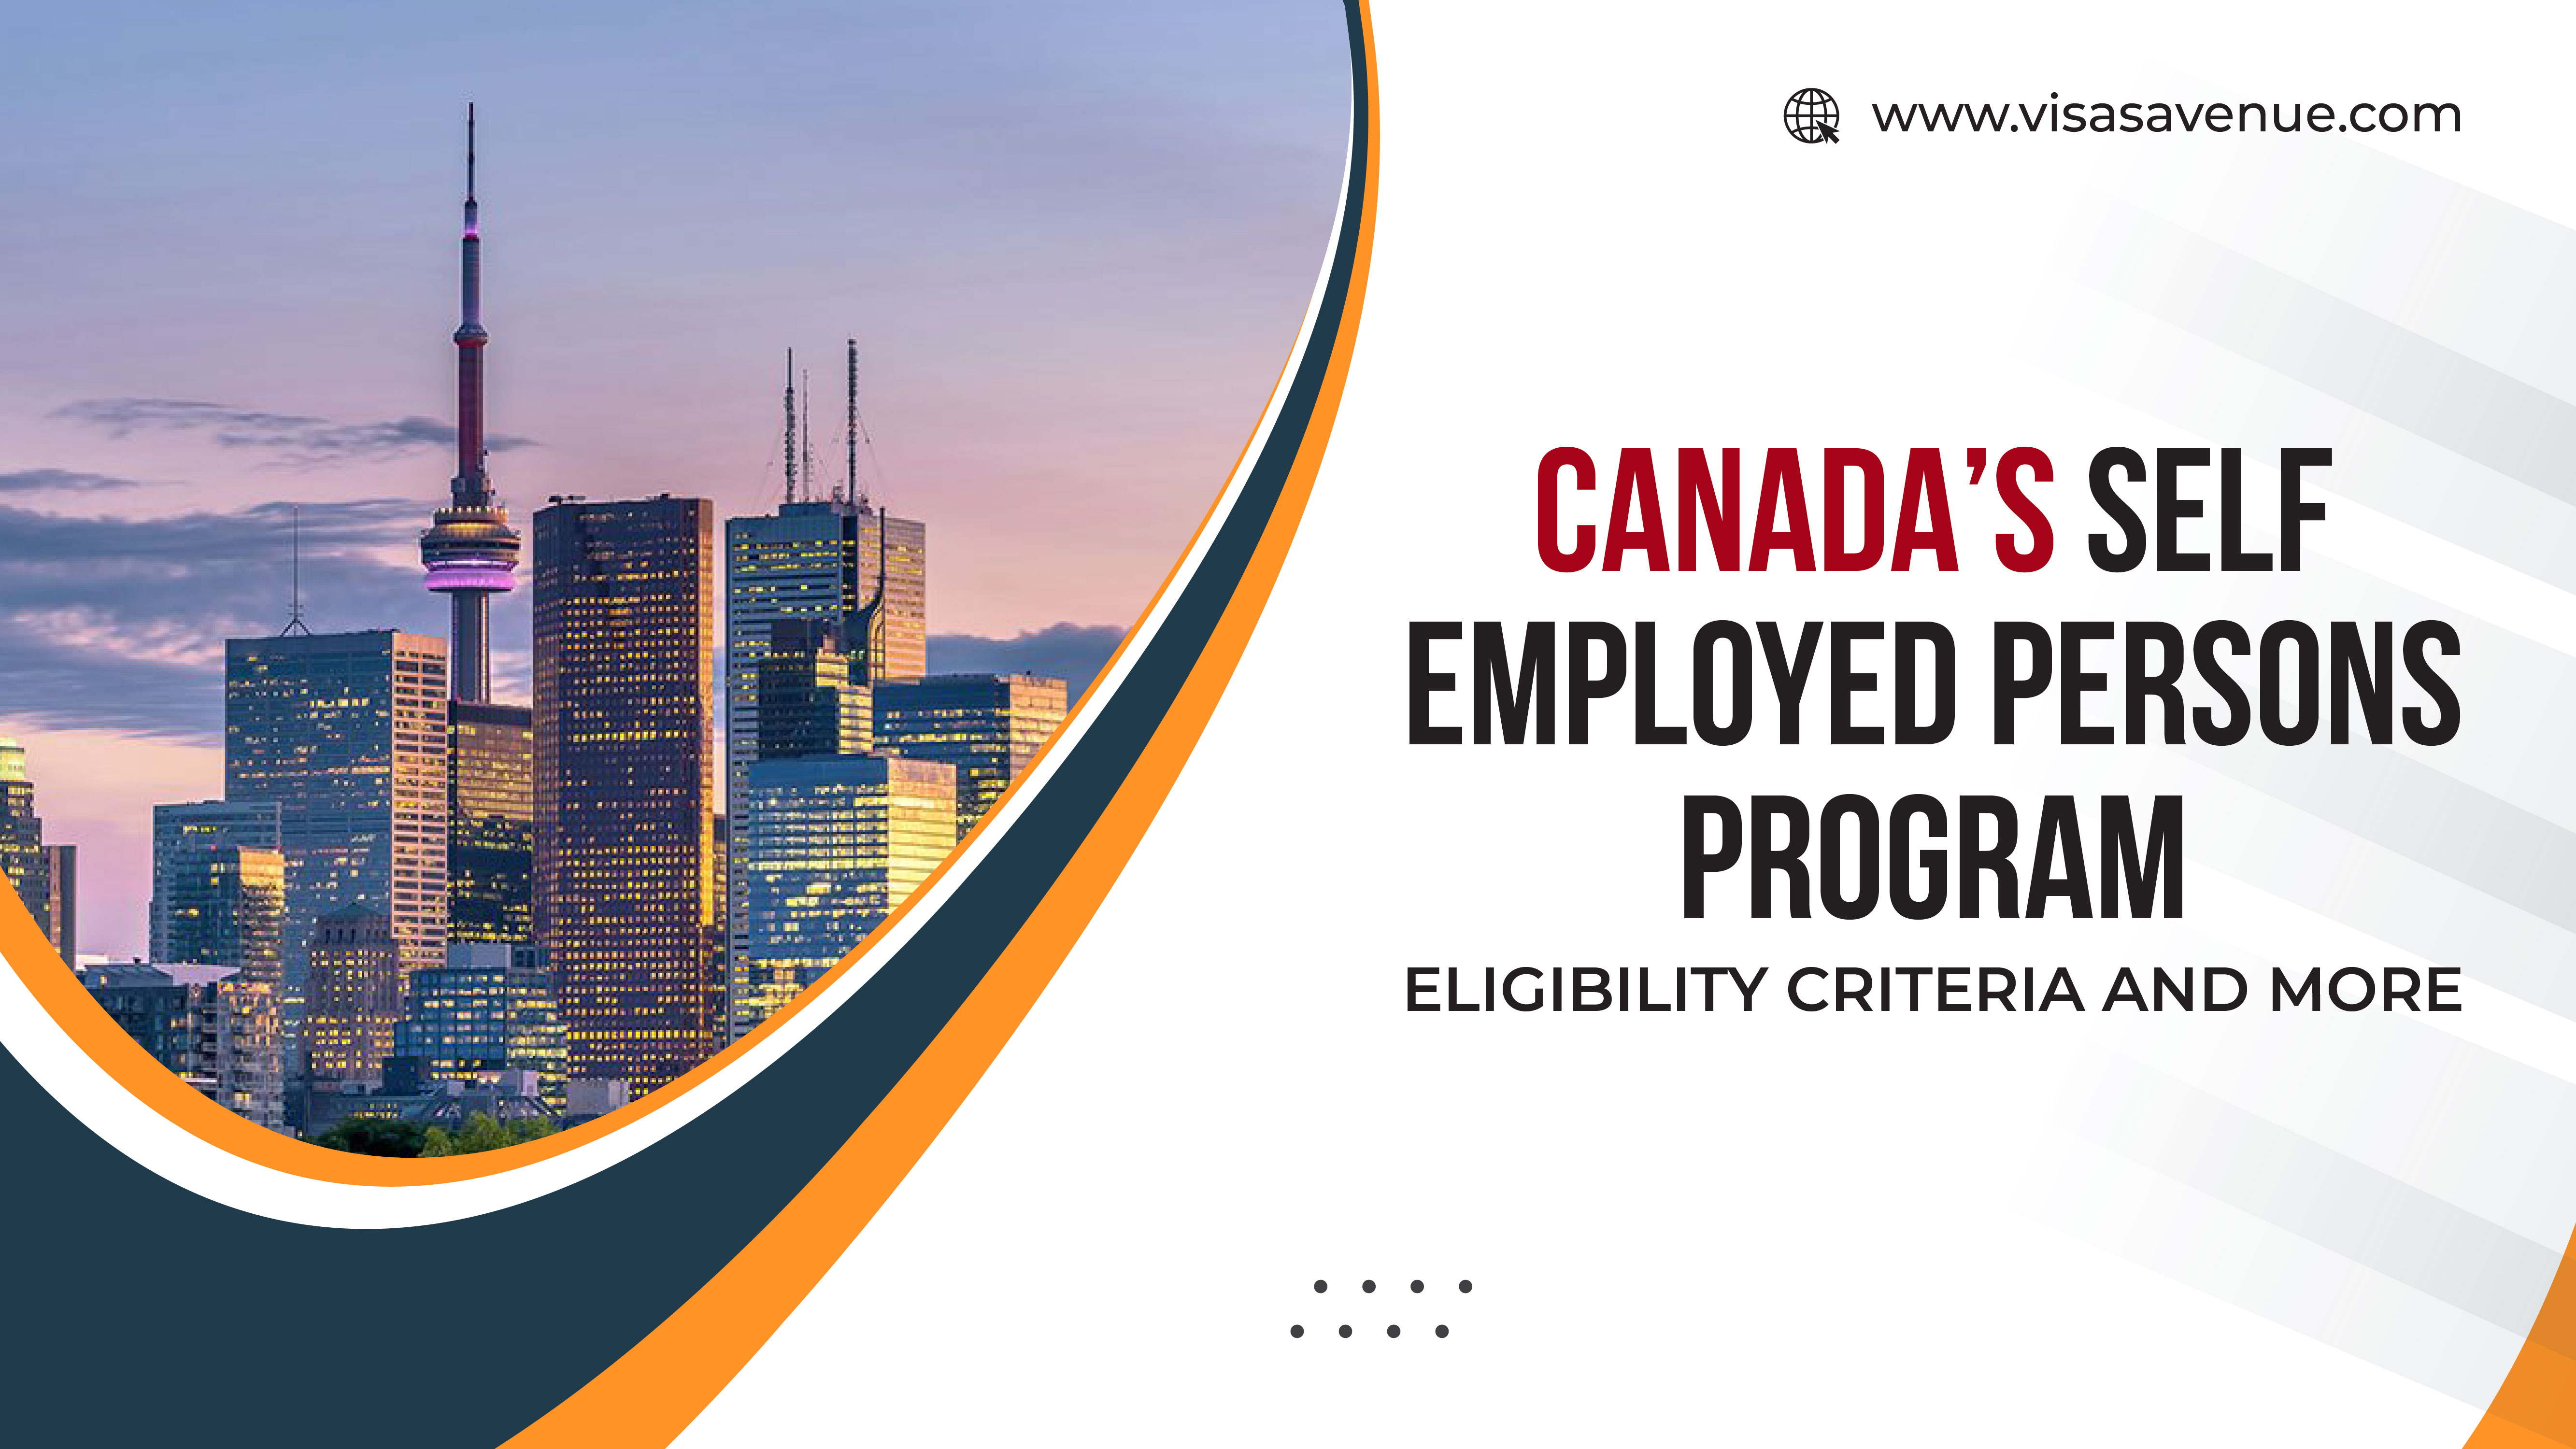 Canadas Self Employed Persons Program - Eligibility Criteria and more